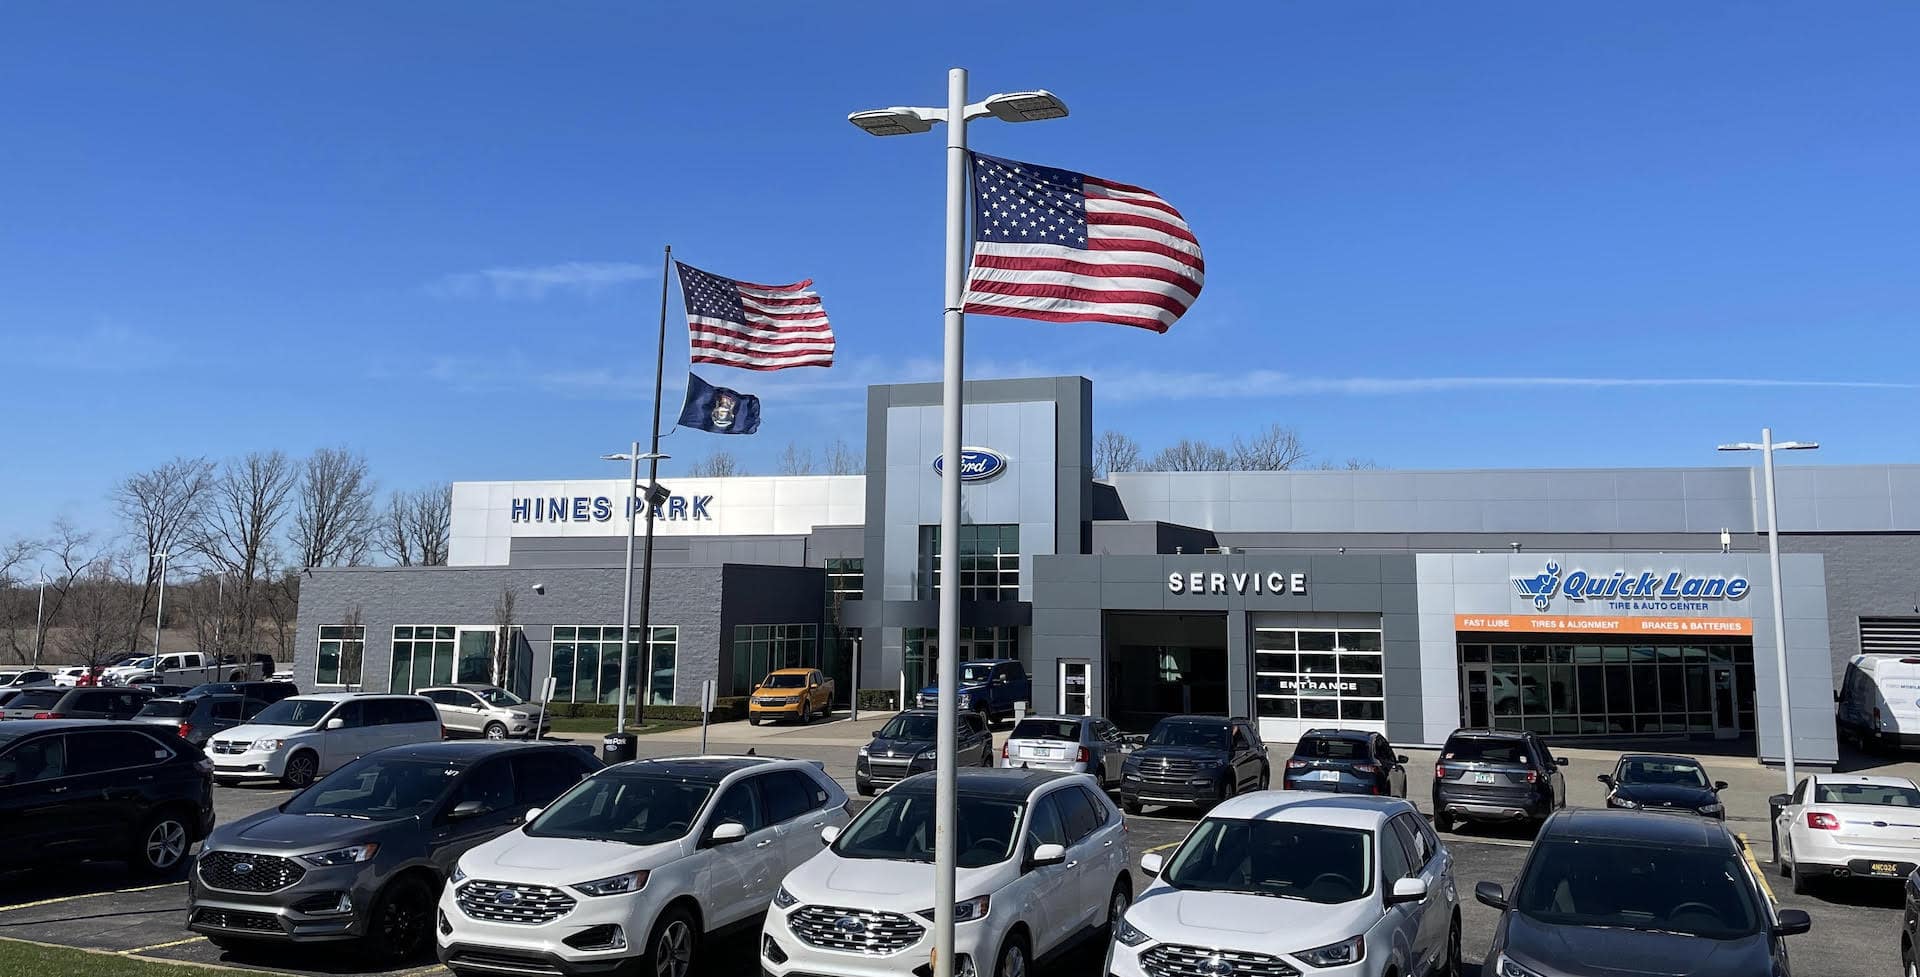 Hines Park Ford